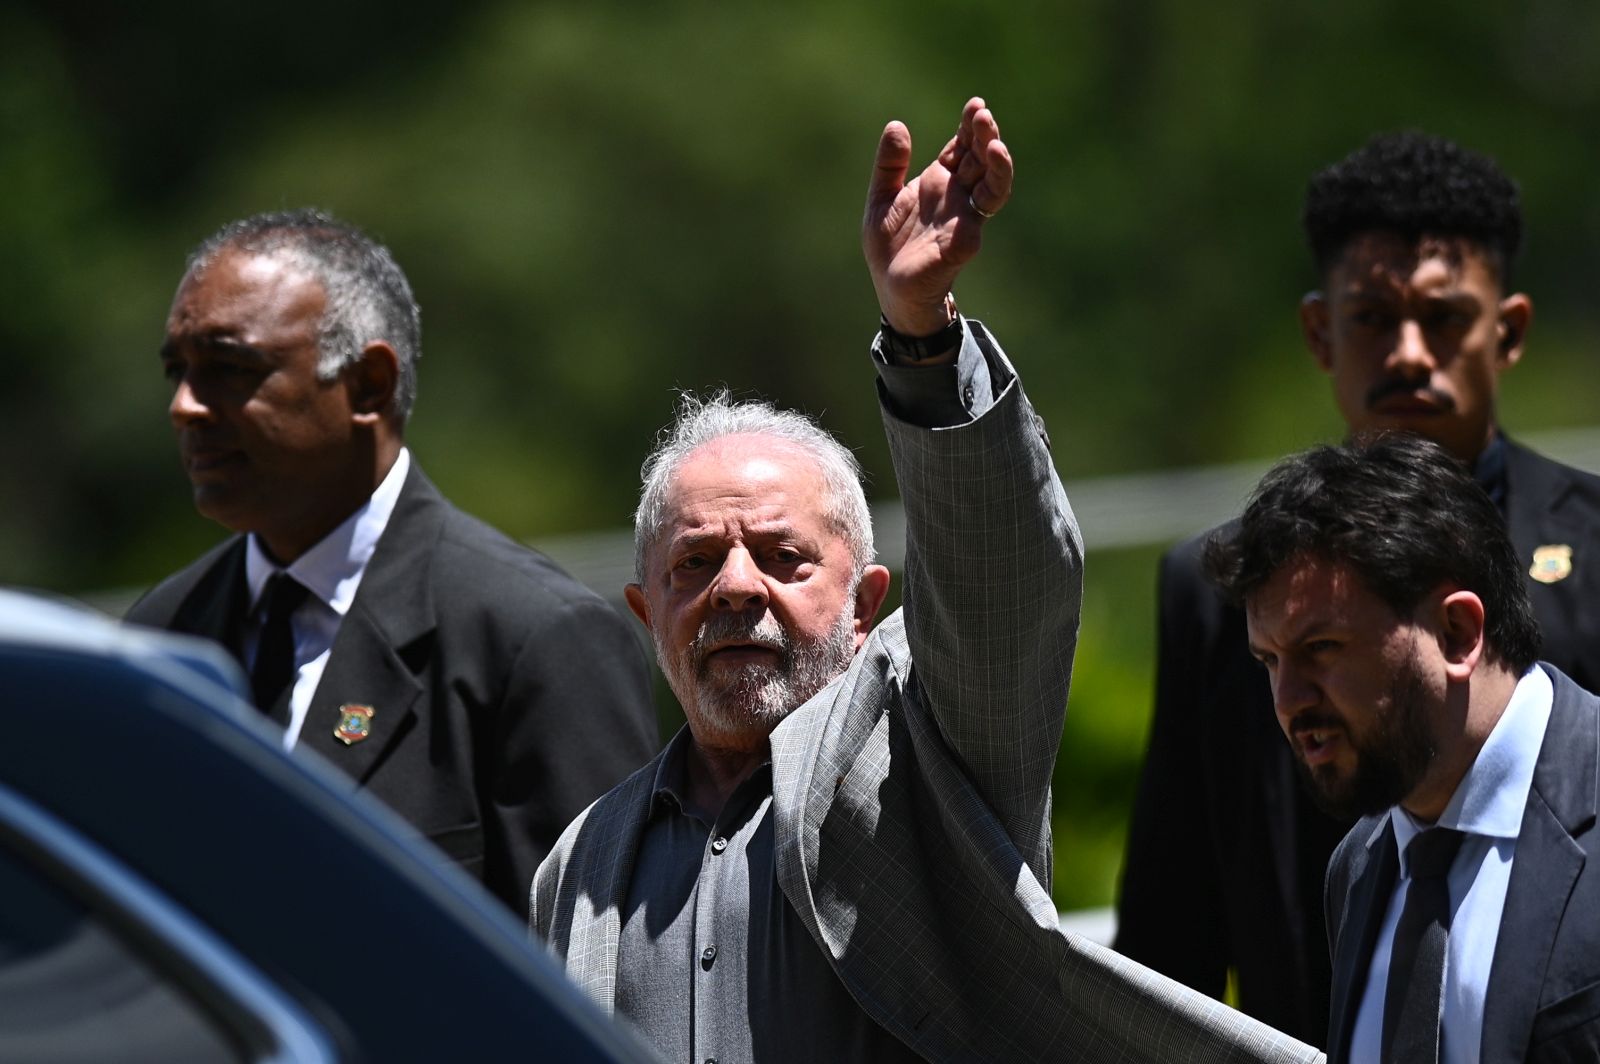 epa10381661 The elected president of Brazil, Luiz Inacio Lula da Silva, arrives to offer a press conference to announce ministers of his future government, in Brasília, Brazil, 29 December 2022. Lula da Silva, who will take office on 01 January 2023, announced on 29 December 16 new ministers, with which his cabinet will have a total of 37 portfolios, one of them devoted for the first time to indigenous affairs.  EPA/Andre Borges